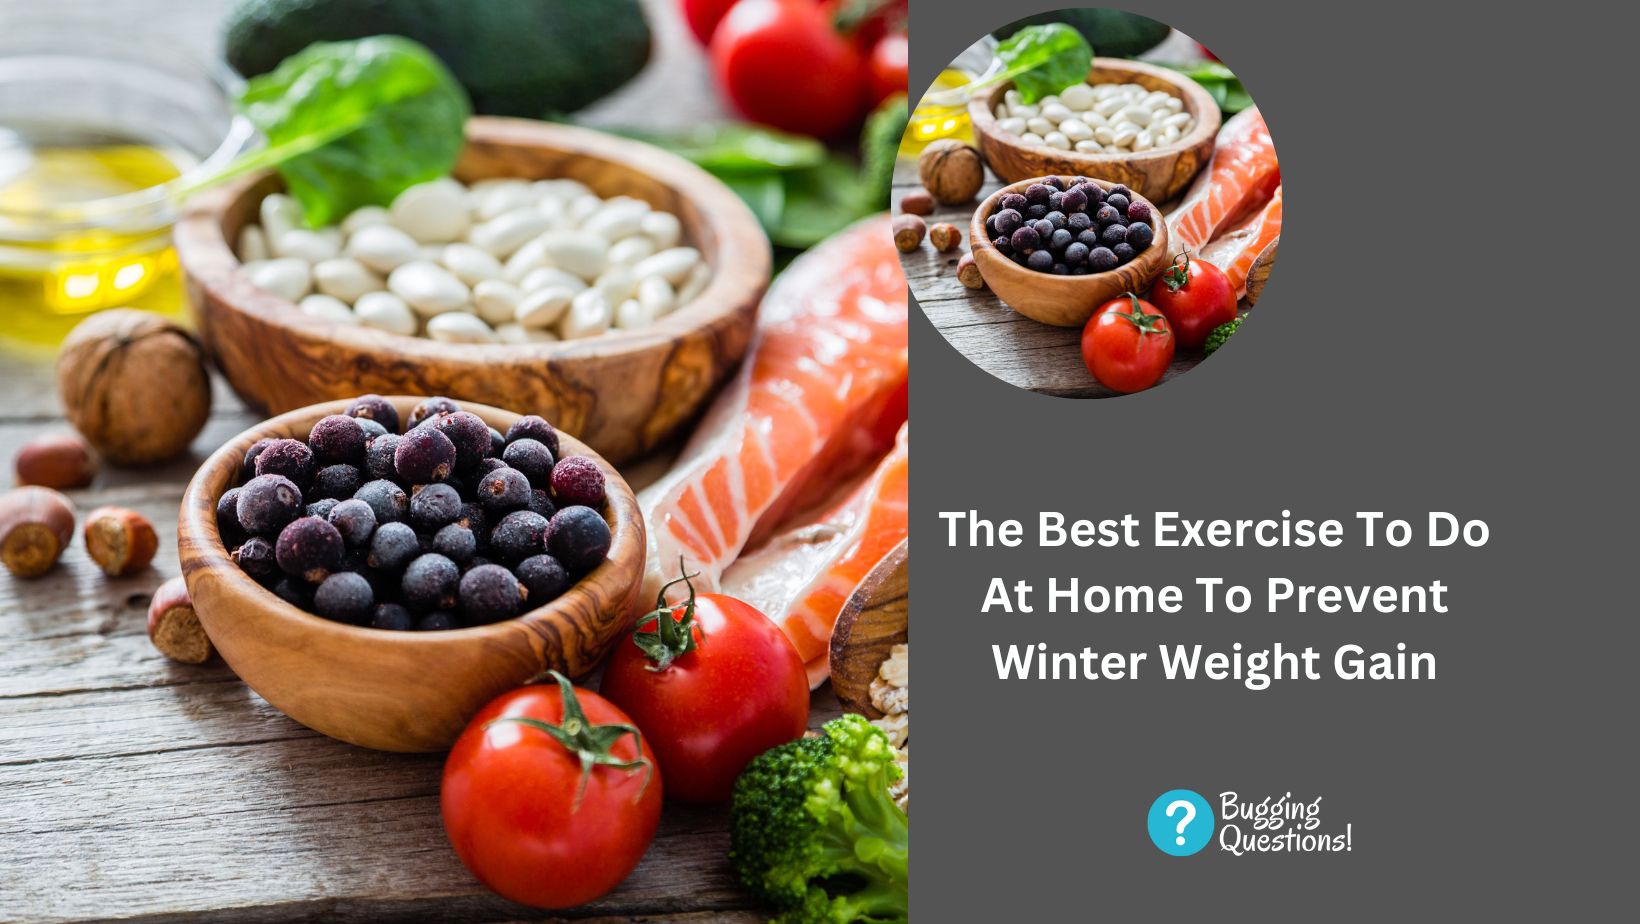 The Best Exercise To Do At Home To Prevent Winter Weight Gain